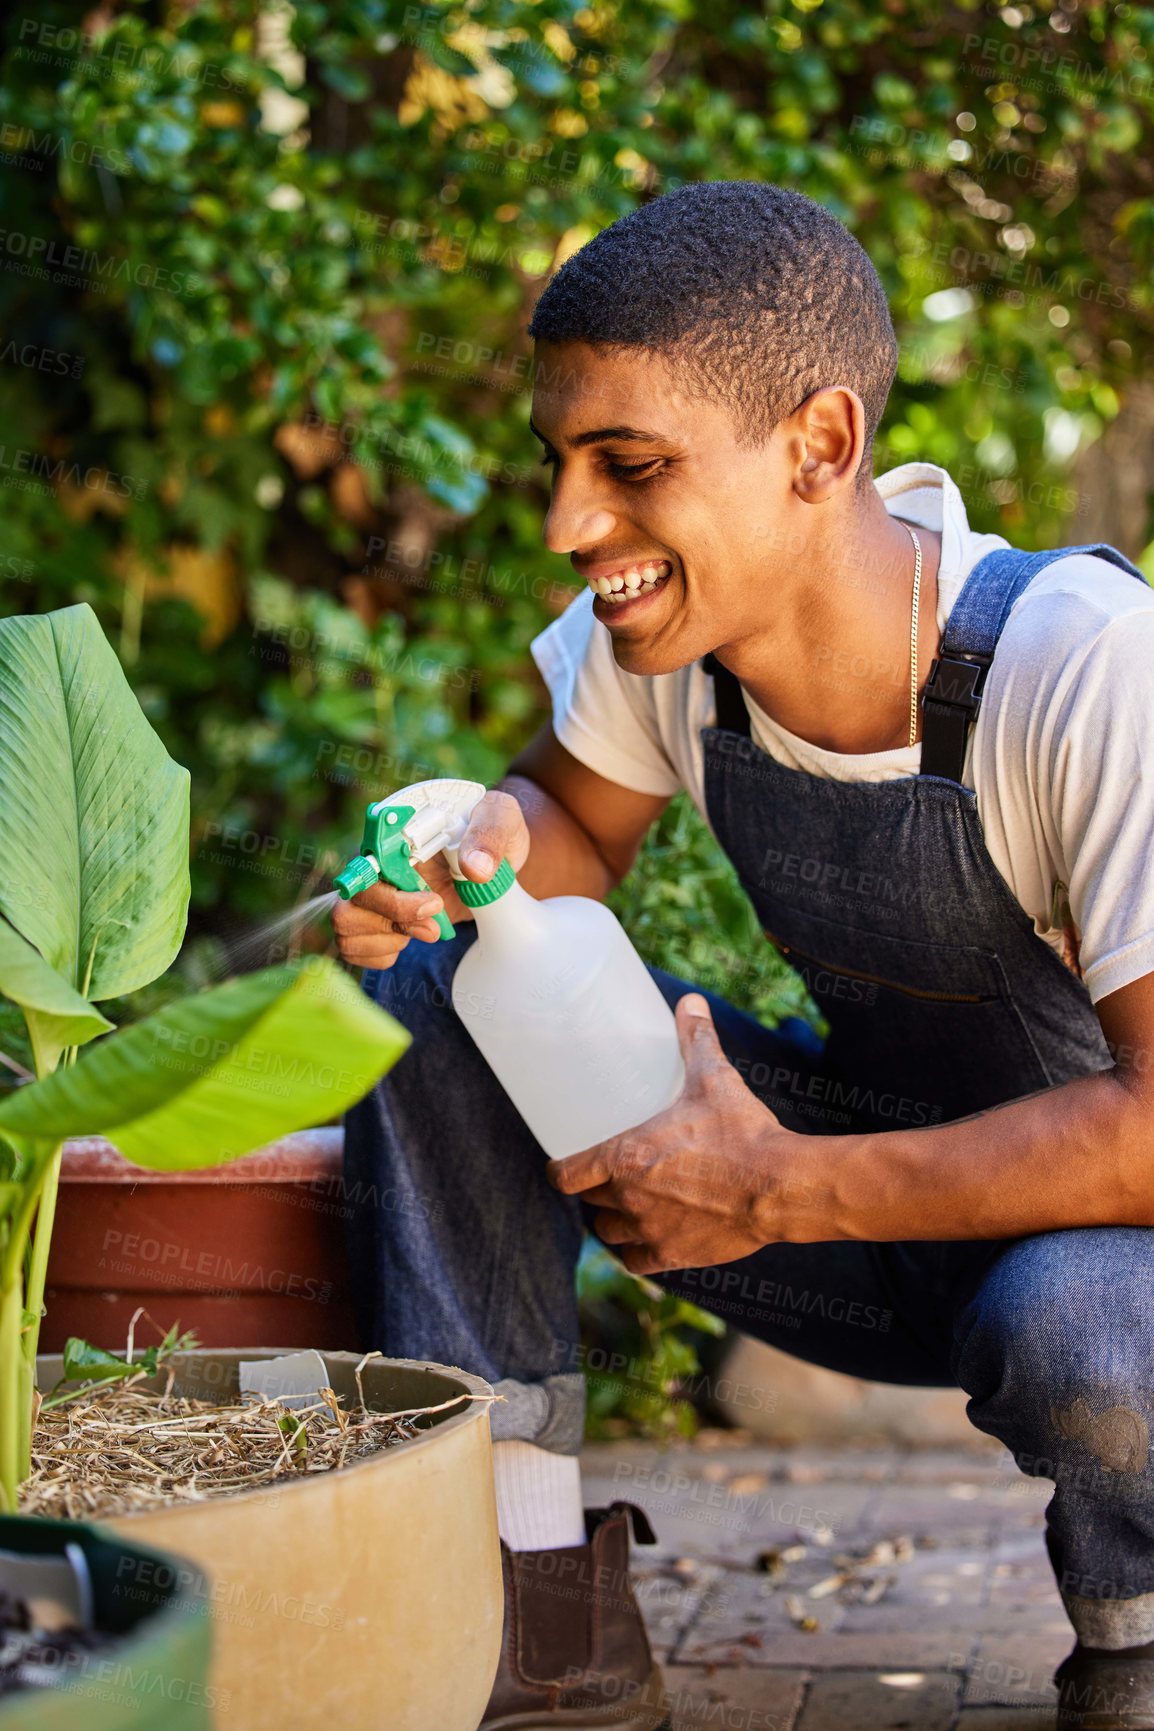 Buy stock photo Cropped shot of a handsome young man crouched in his garden and spraying his plant with water